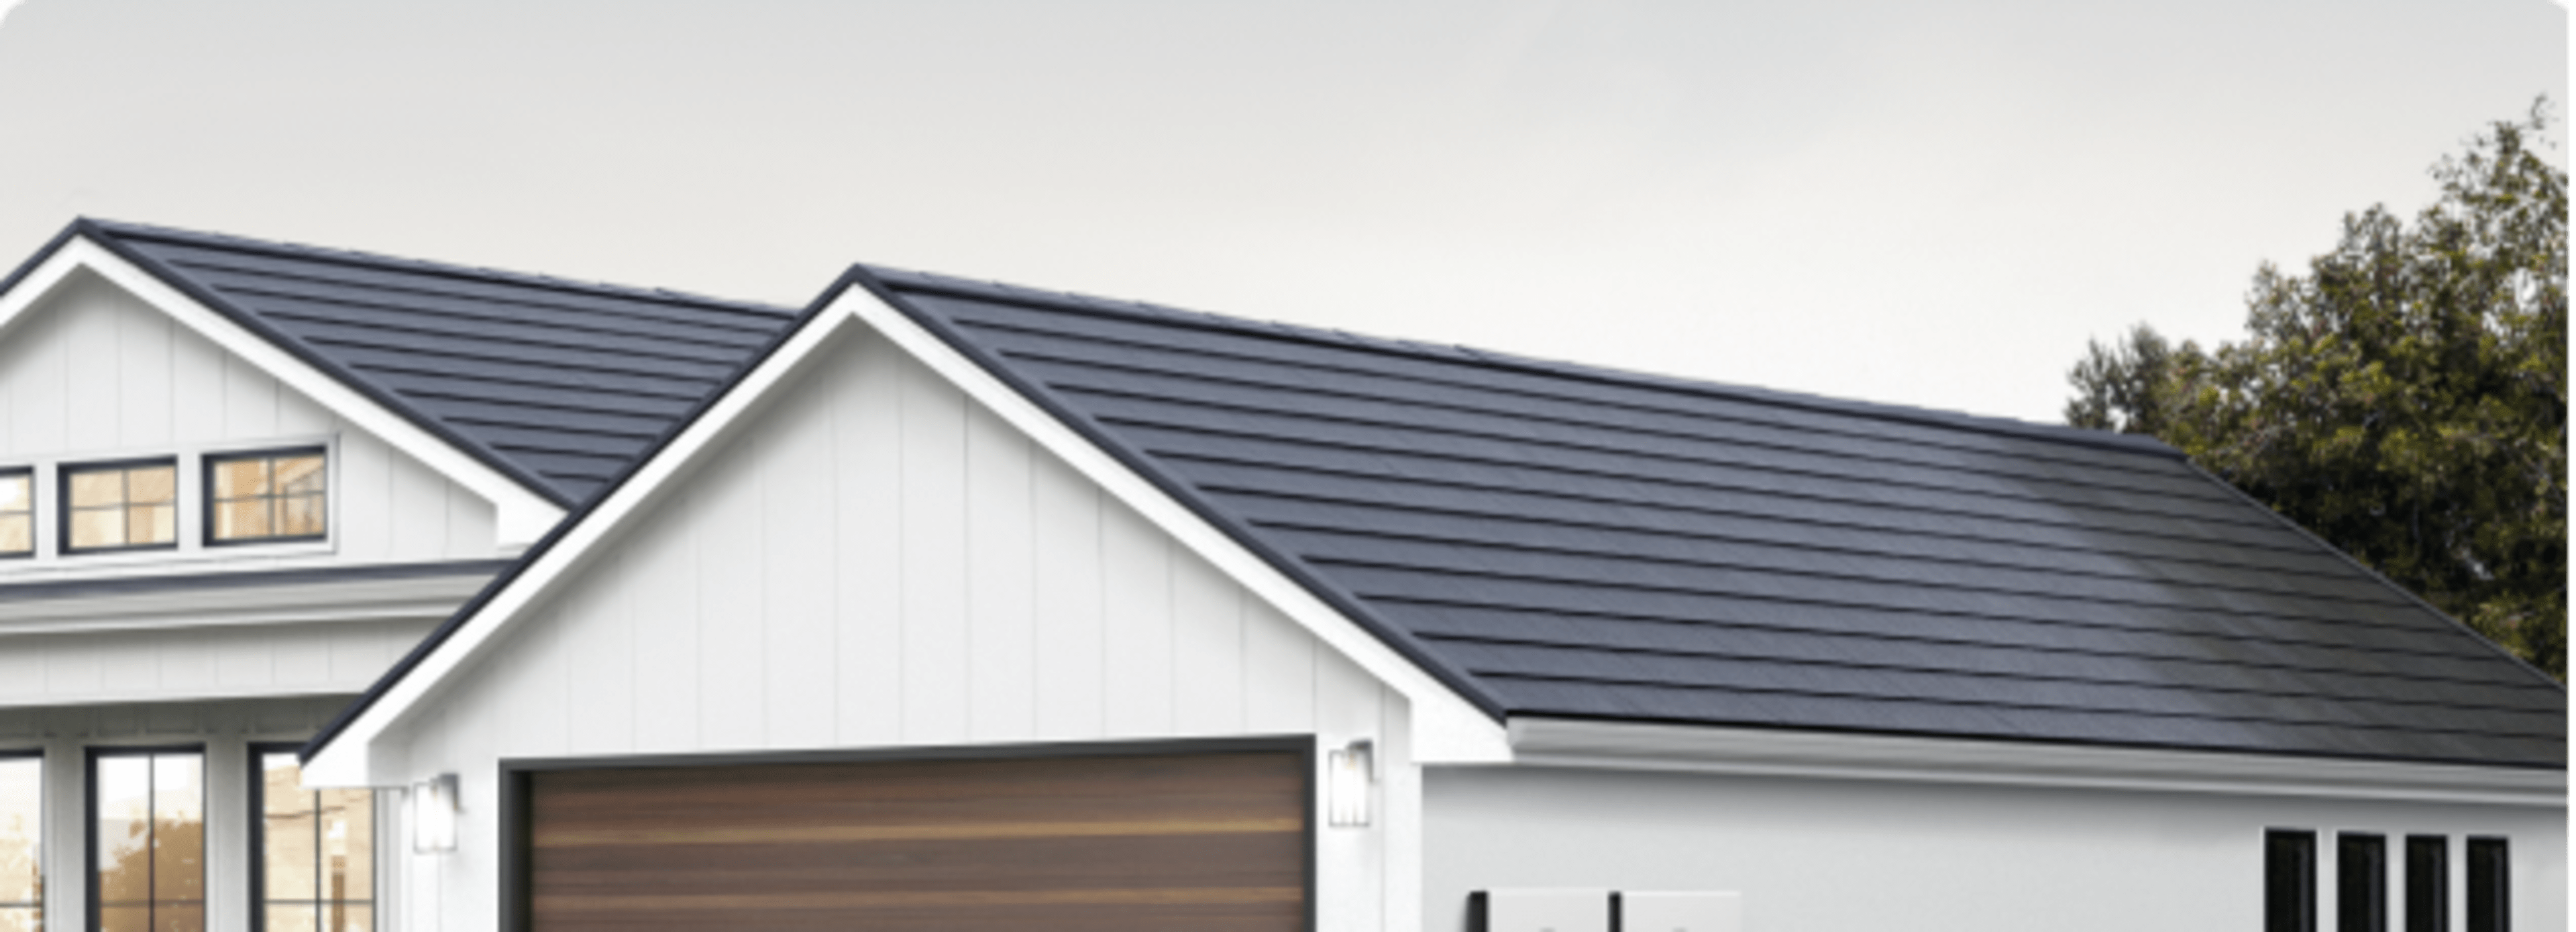 solar roof product selection